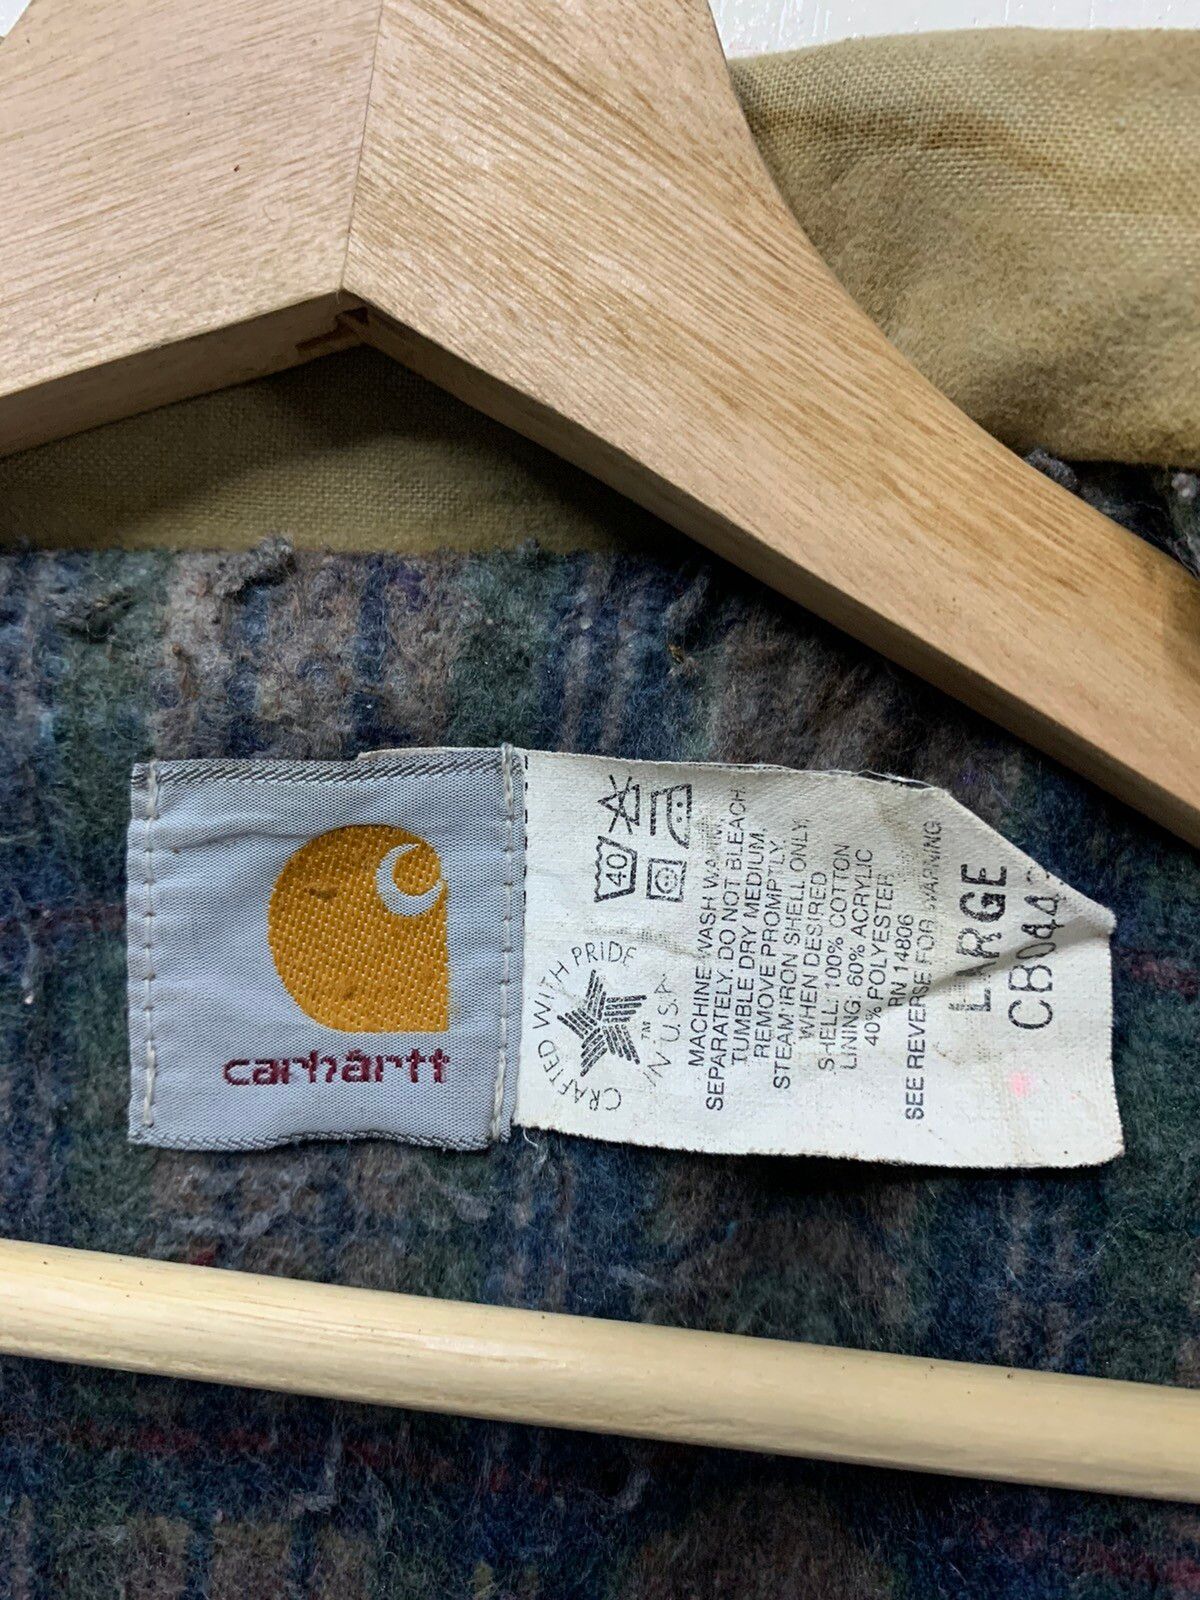 🔥DISTRESSED CARHARTT WORKERS CHORE JACKETS - 10